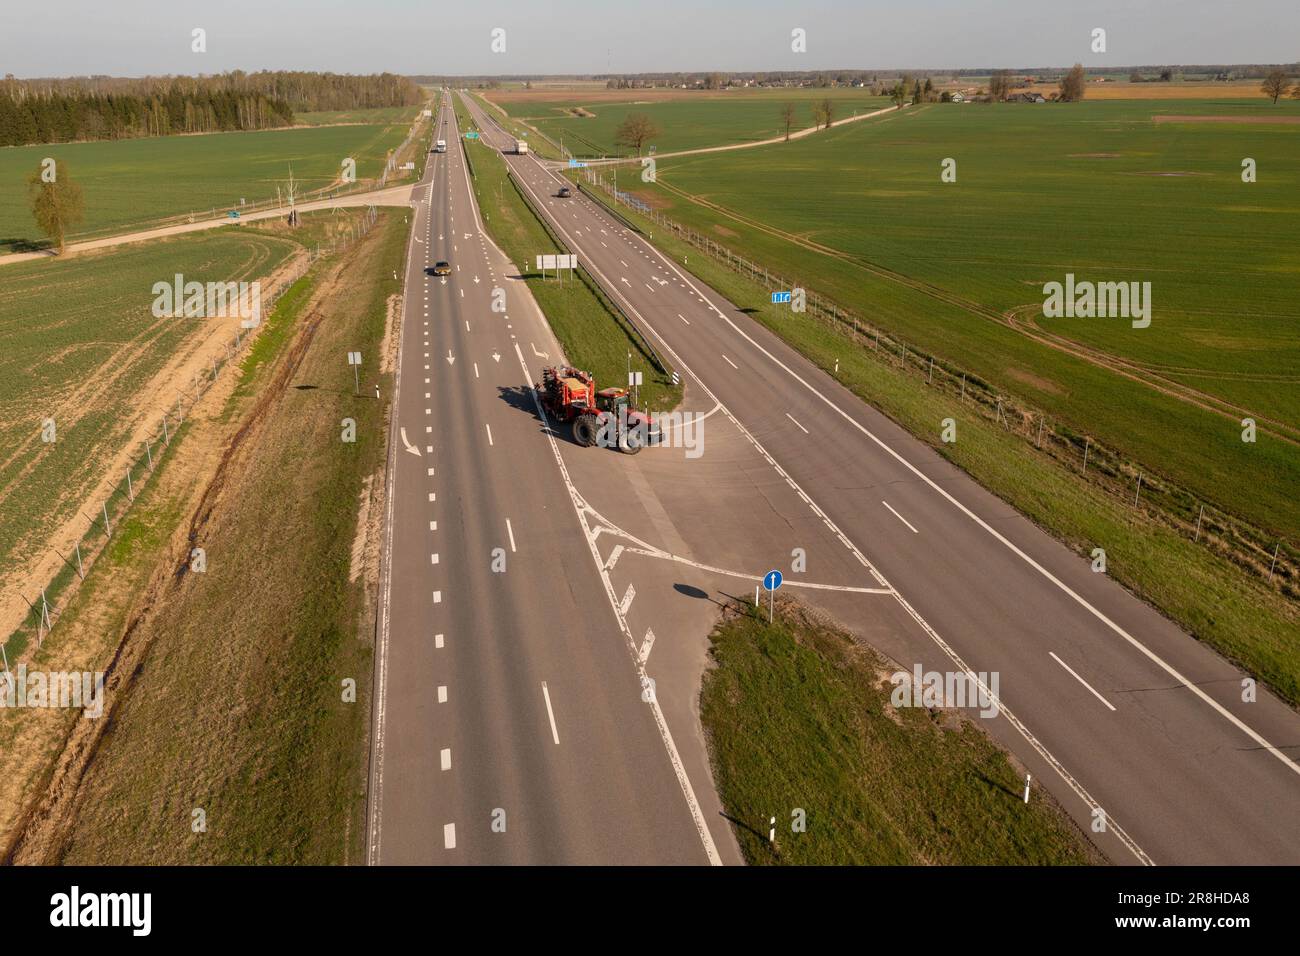 Drone photography of tractor with agricultural equipment driving on a road during spring day. Stock Photo